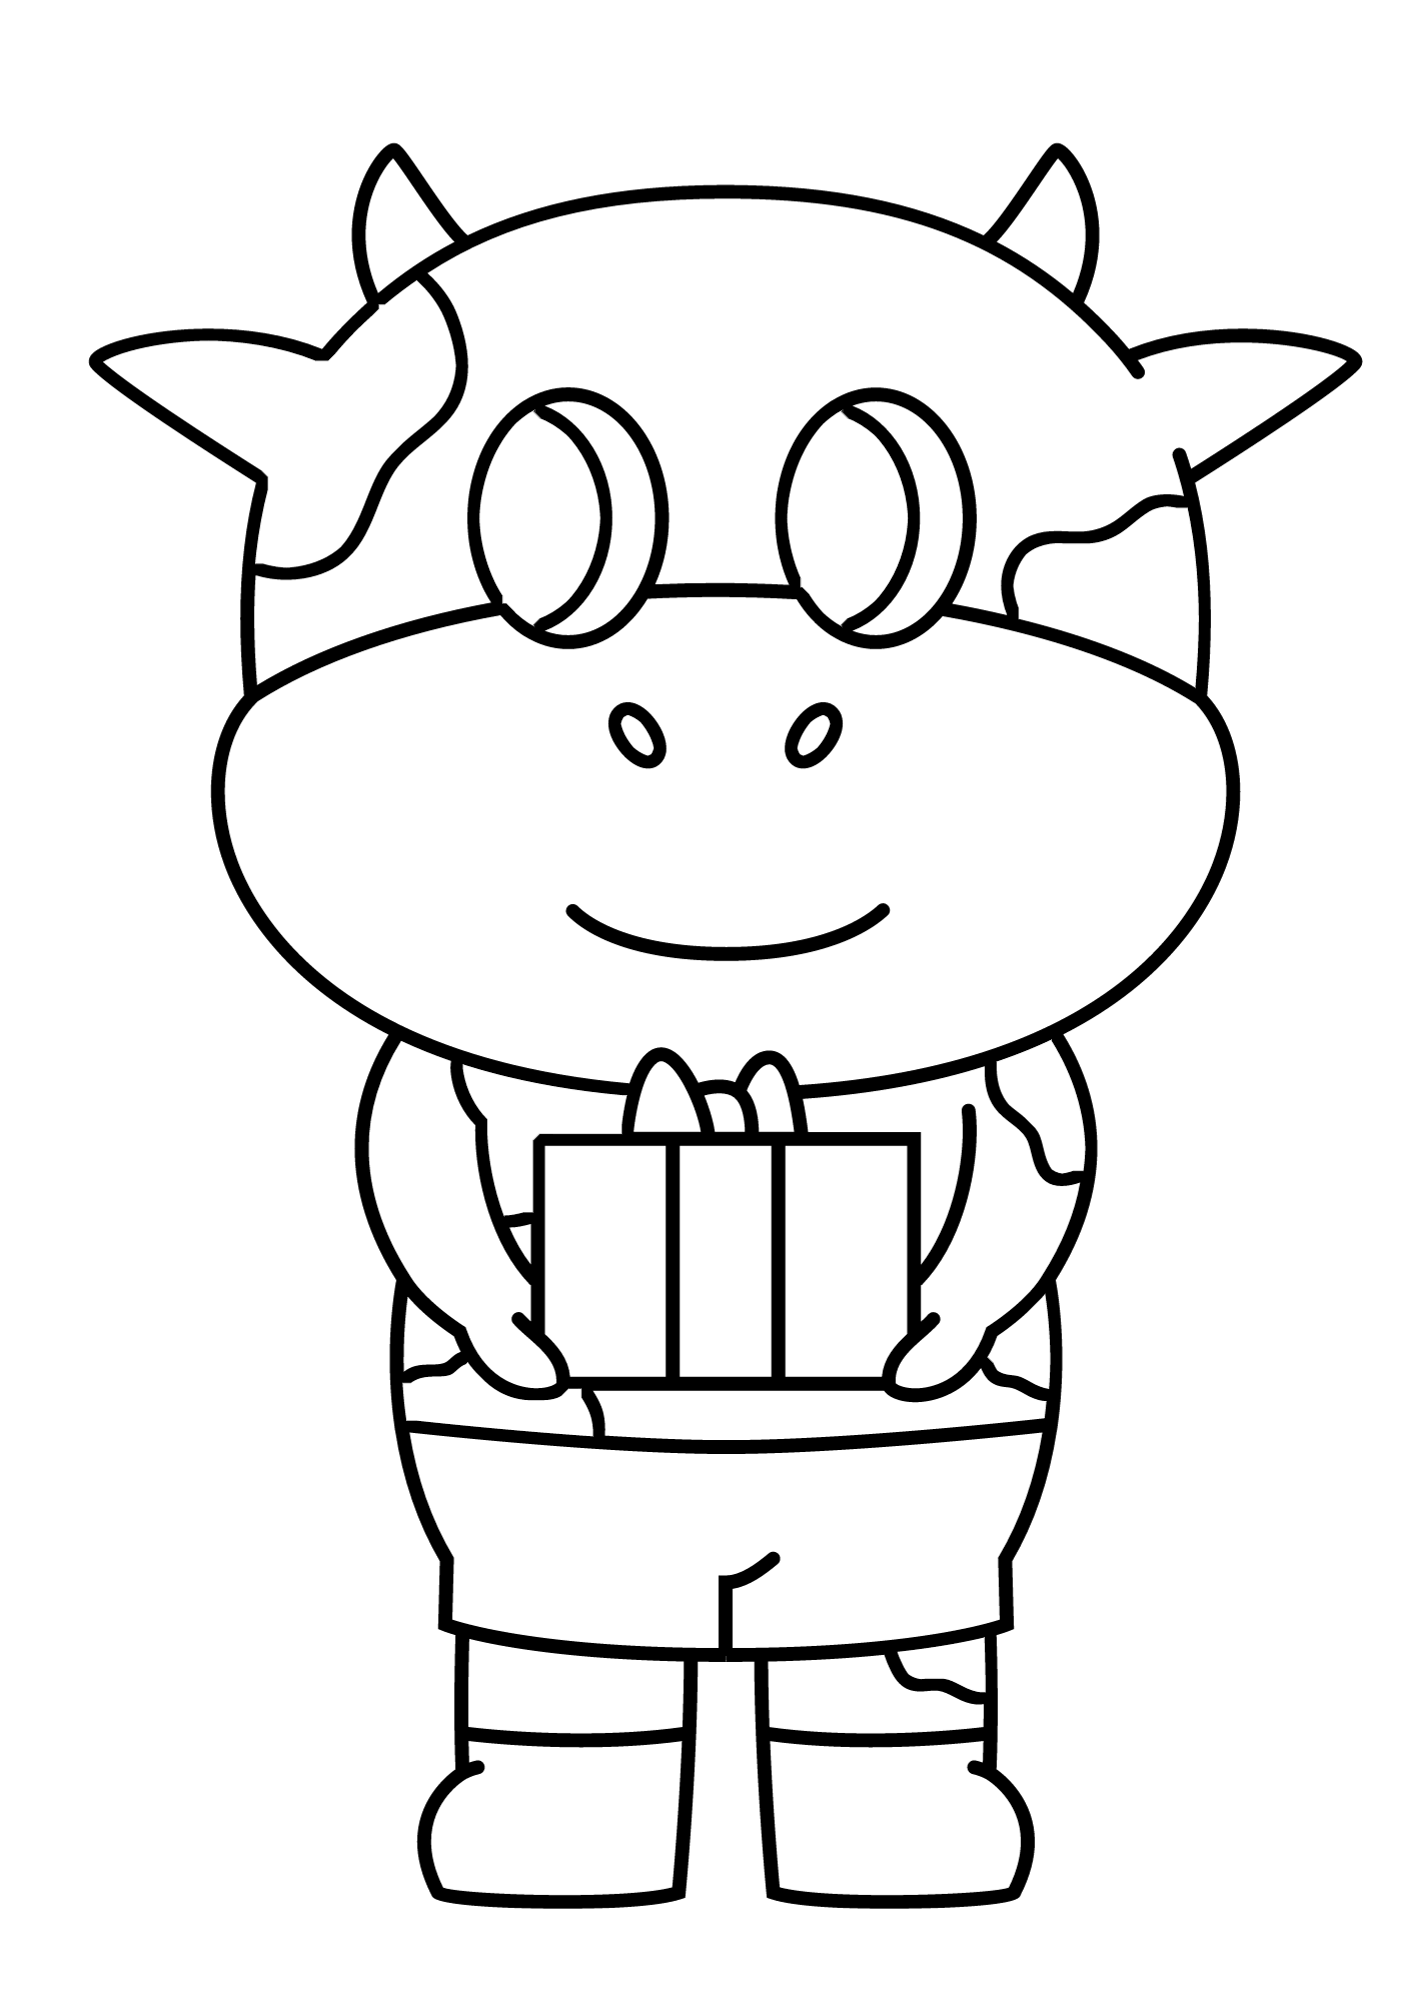 Cute Flutty Cow With A Gift Coloring Page